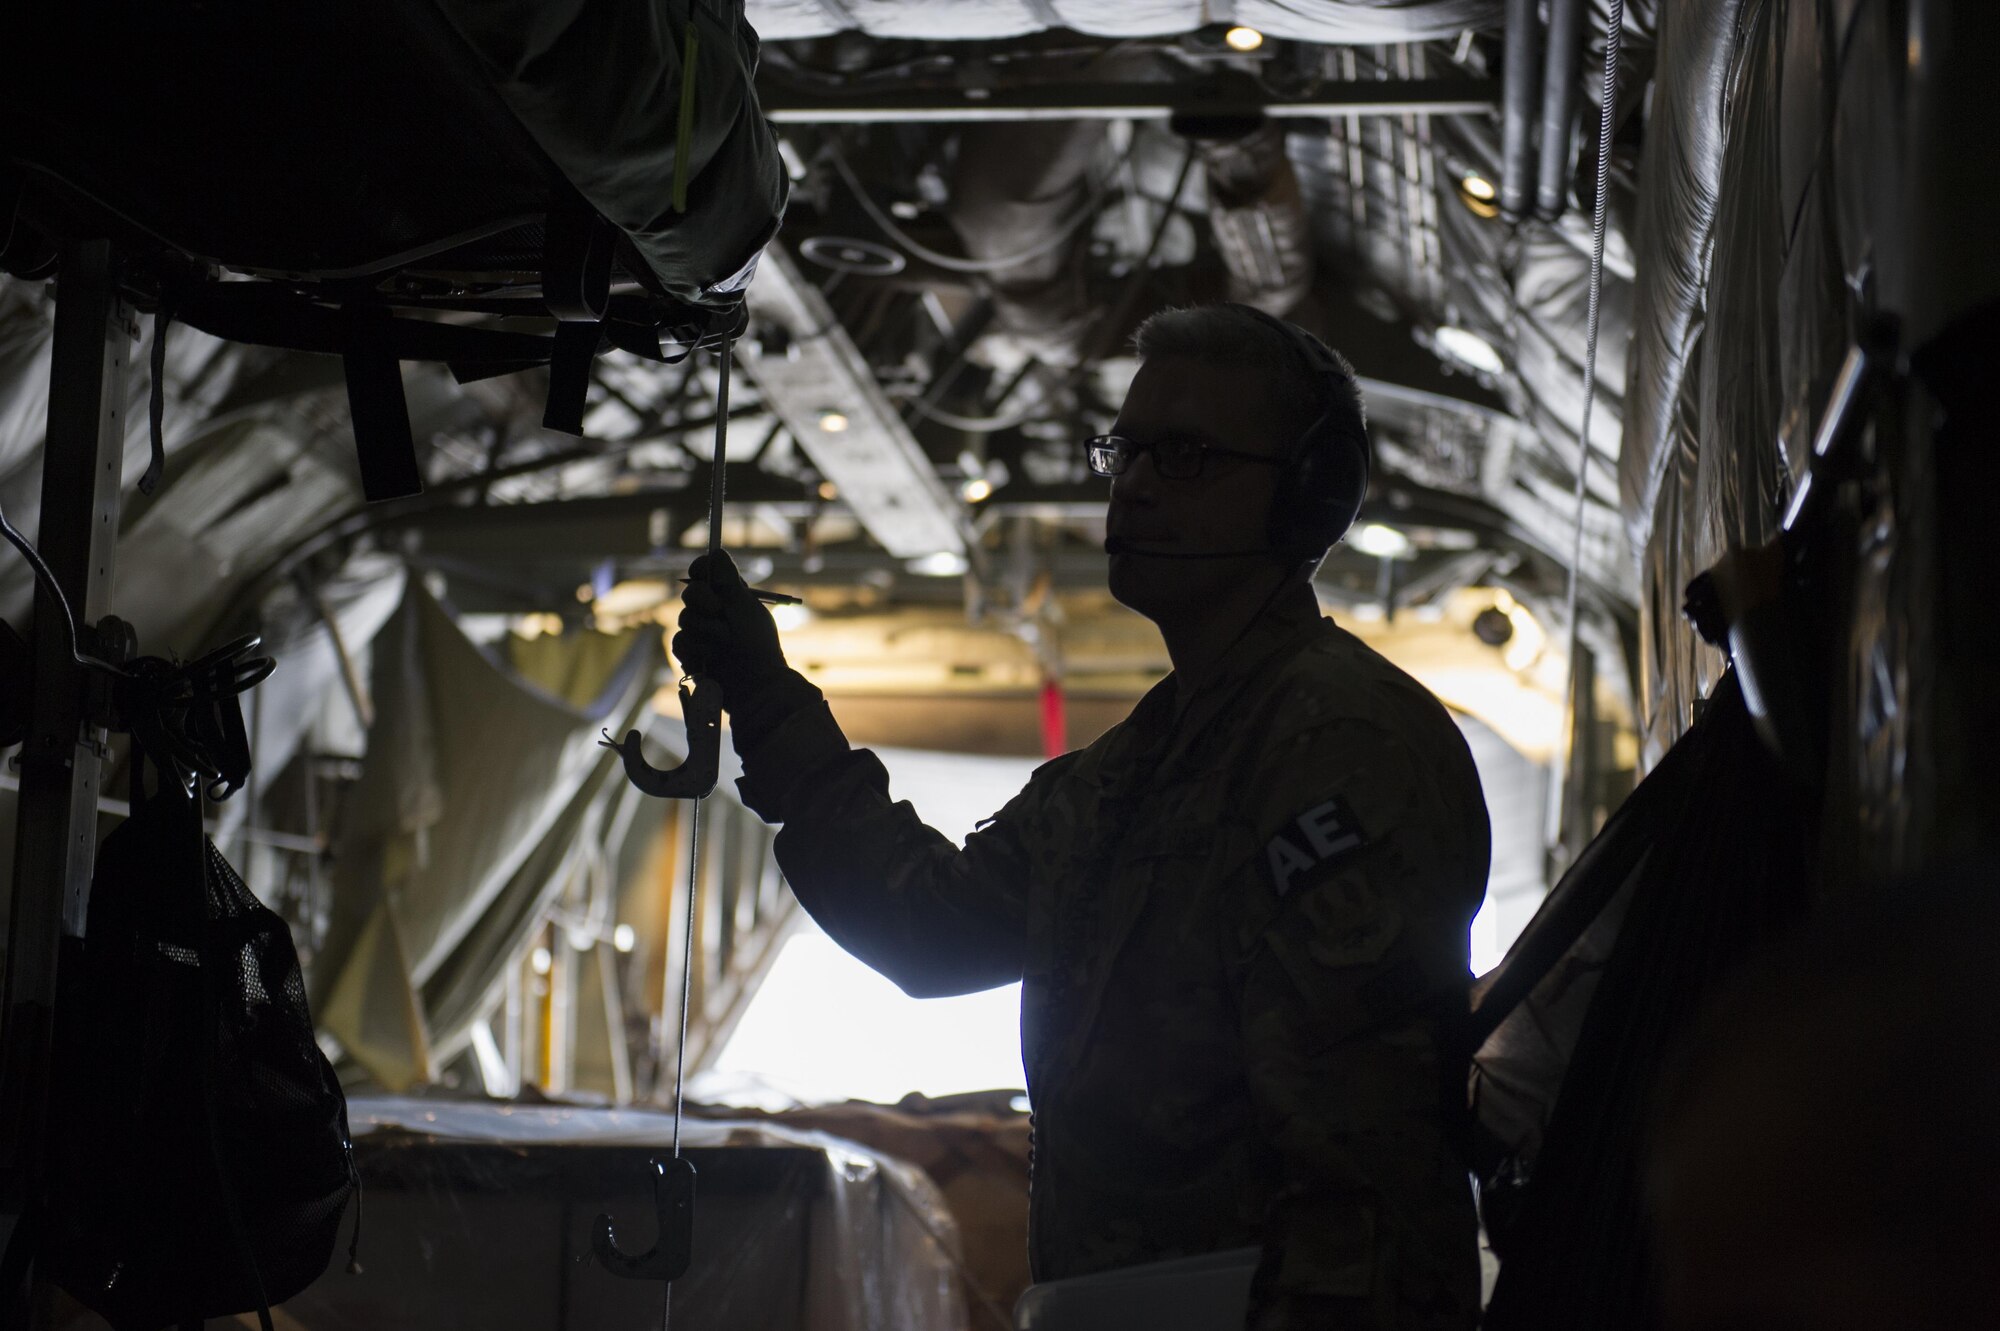 Capt. Steven Woods, 455th Expeditionary Aeromedical Evacuation Squadron flight nurse, deployed from the 43rd AES at Pope Army Airfield, N.C., checks the litter configuration aboard a C-130 Hercules during a medevac alert at Bagram Airfield, Afghanistan, Nov. 6, 2015. The 455th EAES is tasked with moving injured and sick patients to locations with higher levels of medical care. (U.S. Air Force photo by Tech. Sgt. Robert Cloys/RELEASED)